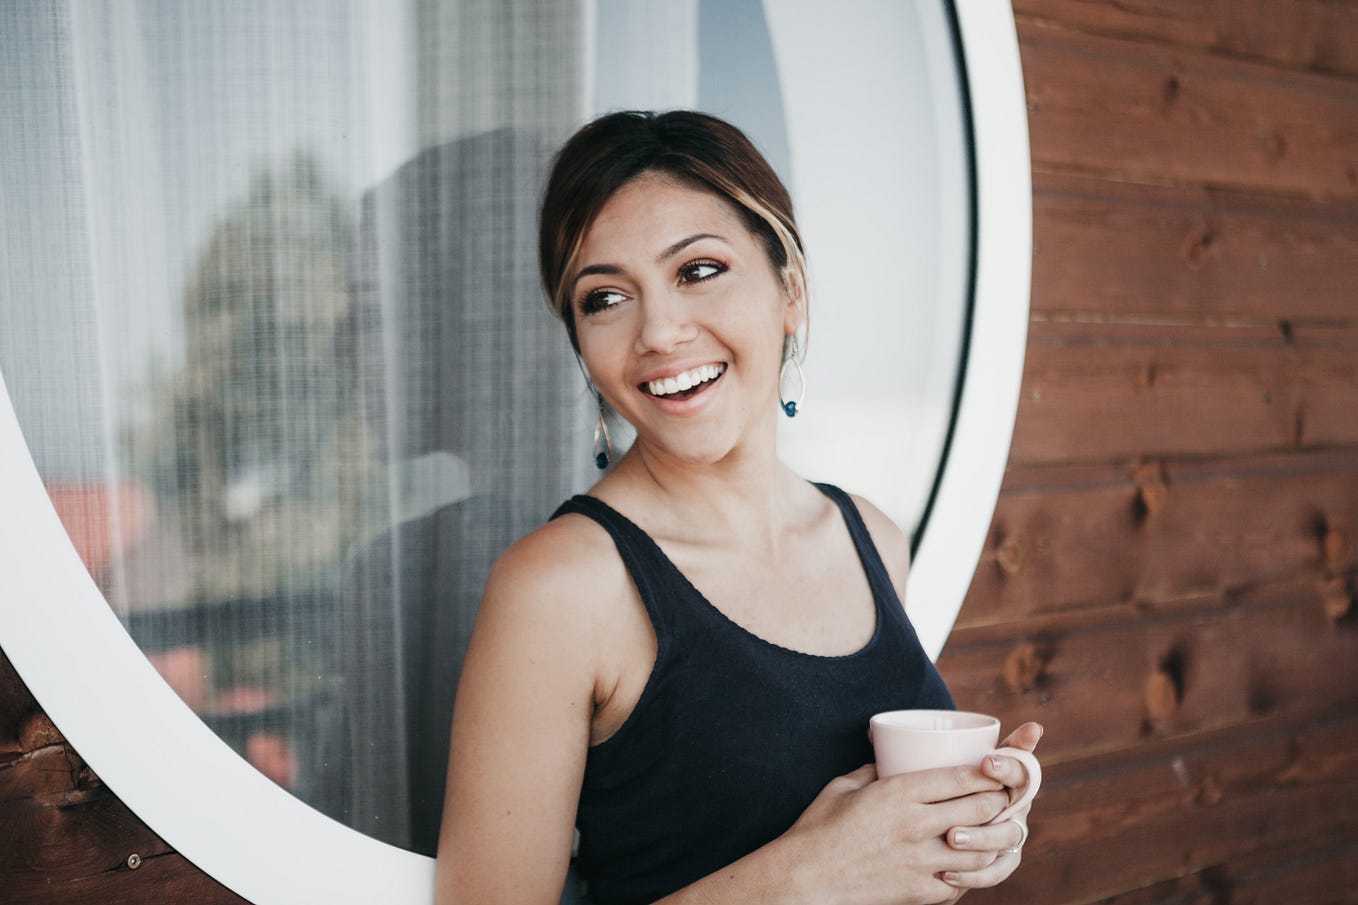 Woman leaning against a window with a mug in her hand and a smile on her face.